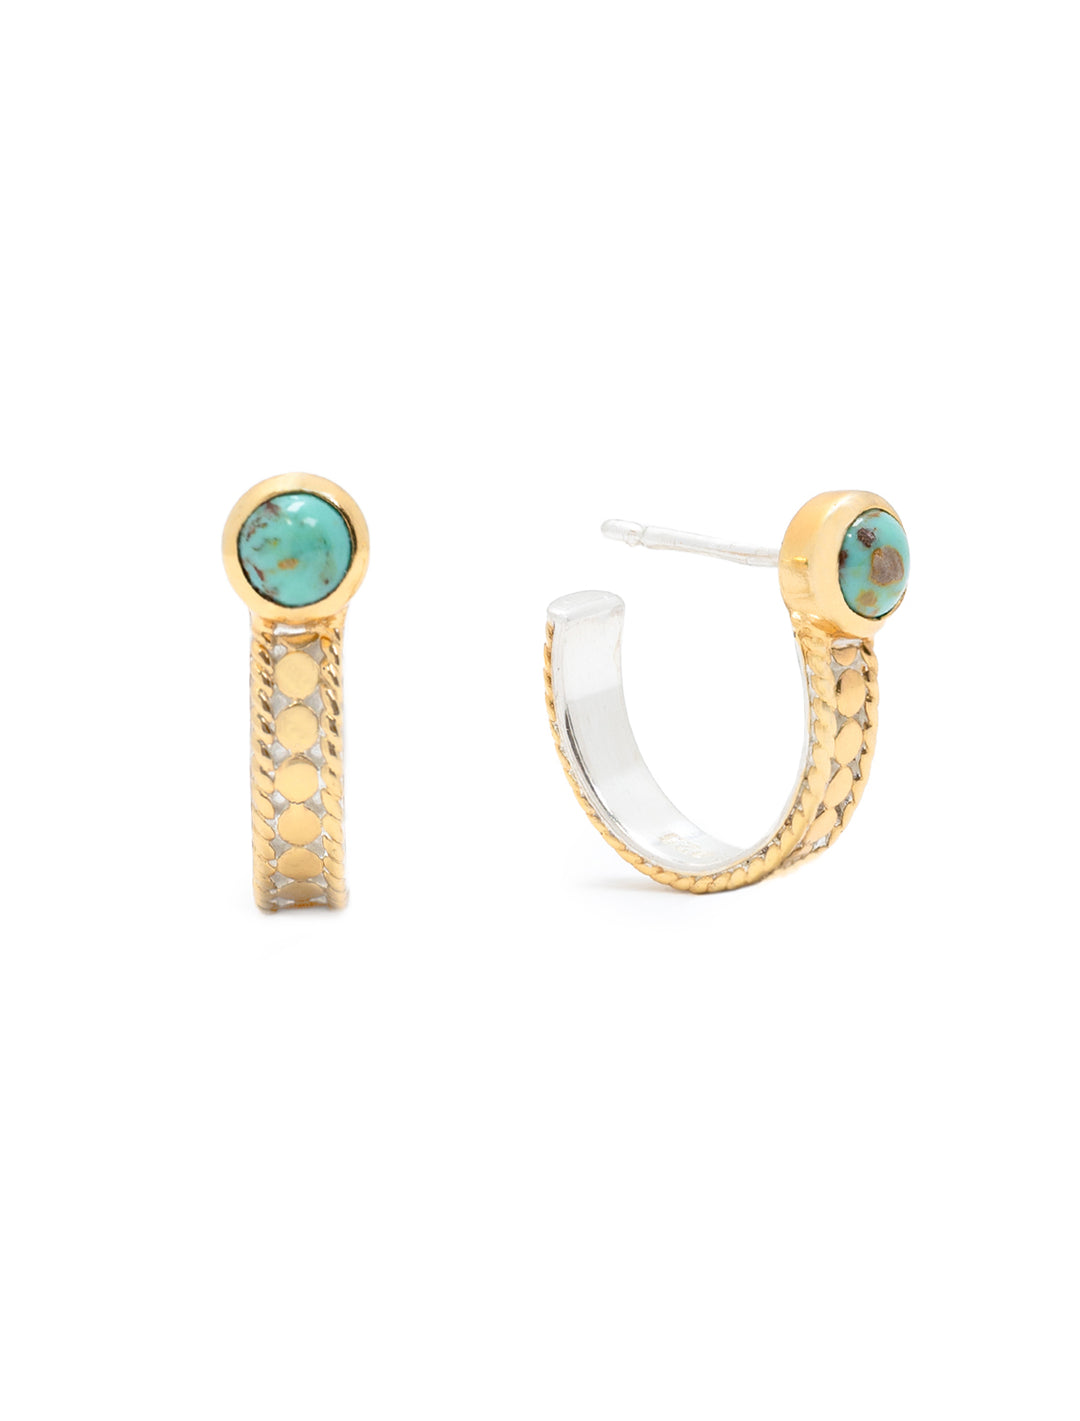 Front view of Anna Beck's turquoise hoop earrings in gold.